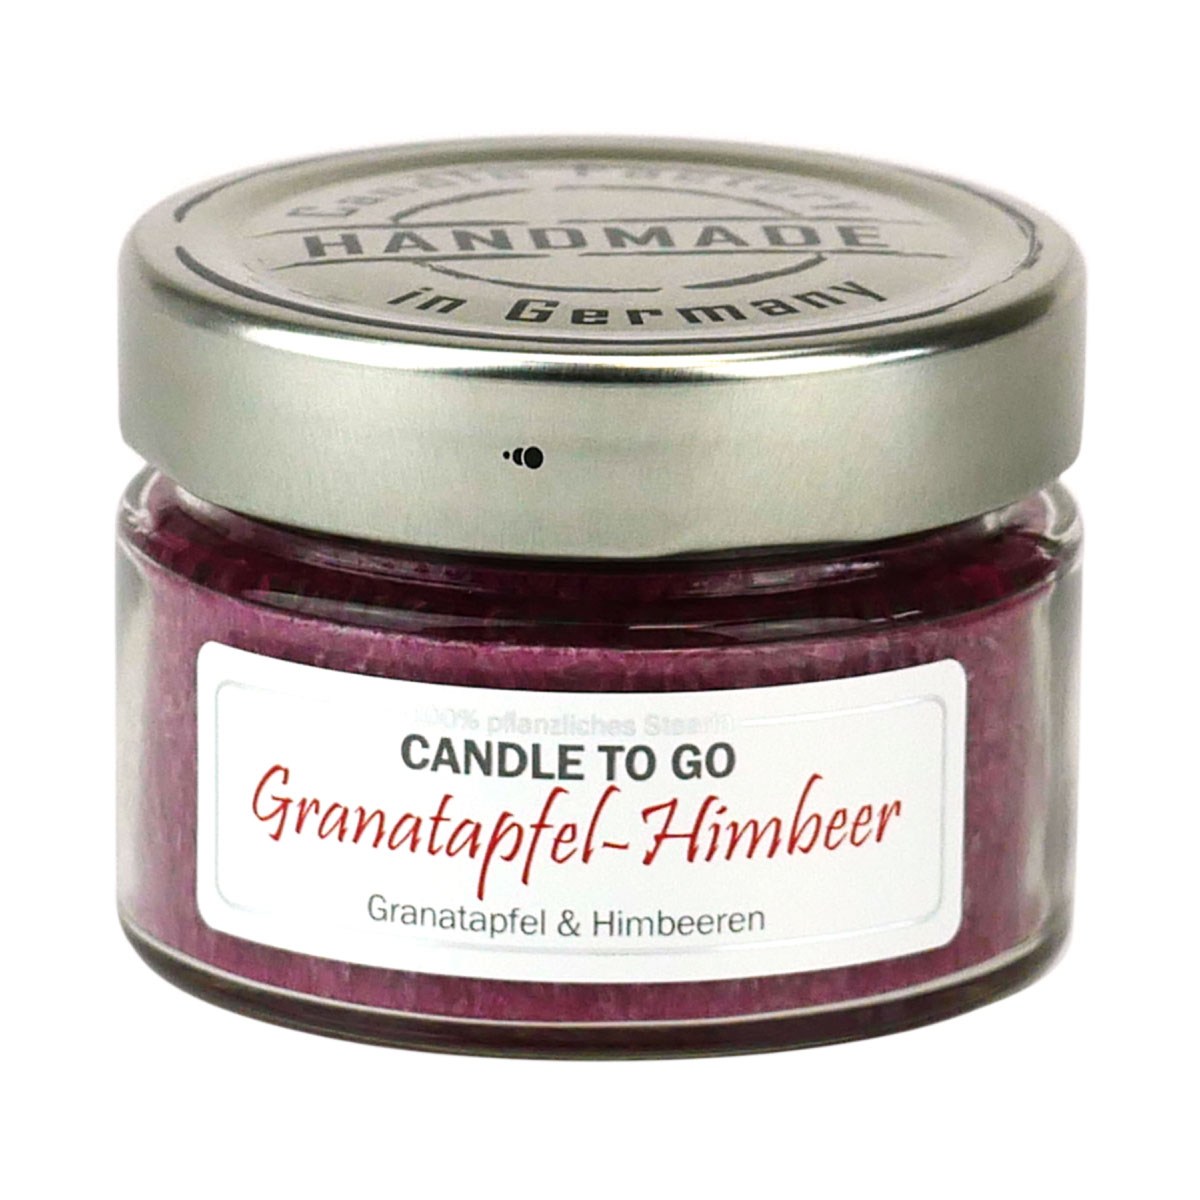 Granatapfel Himbeer - Candle to Go Duftkerze von Candle Factory